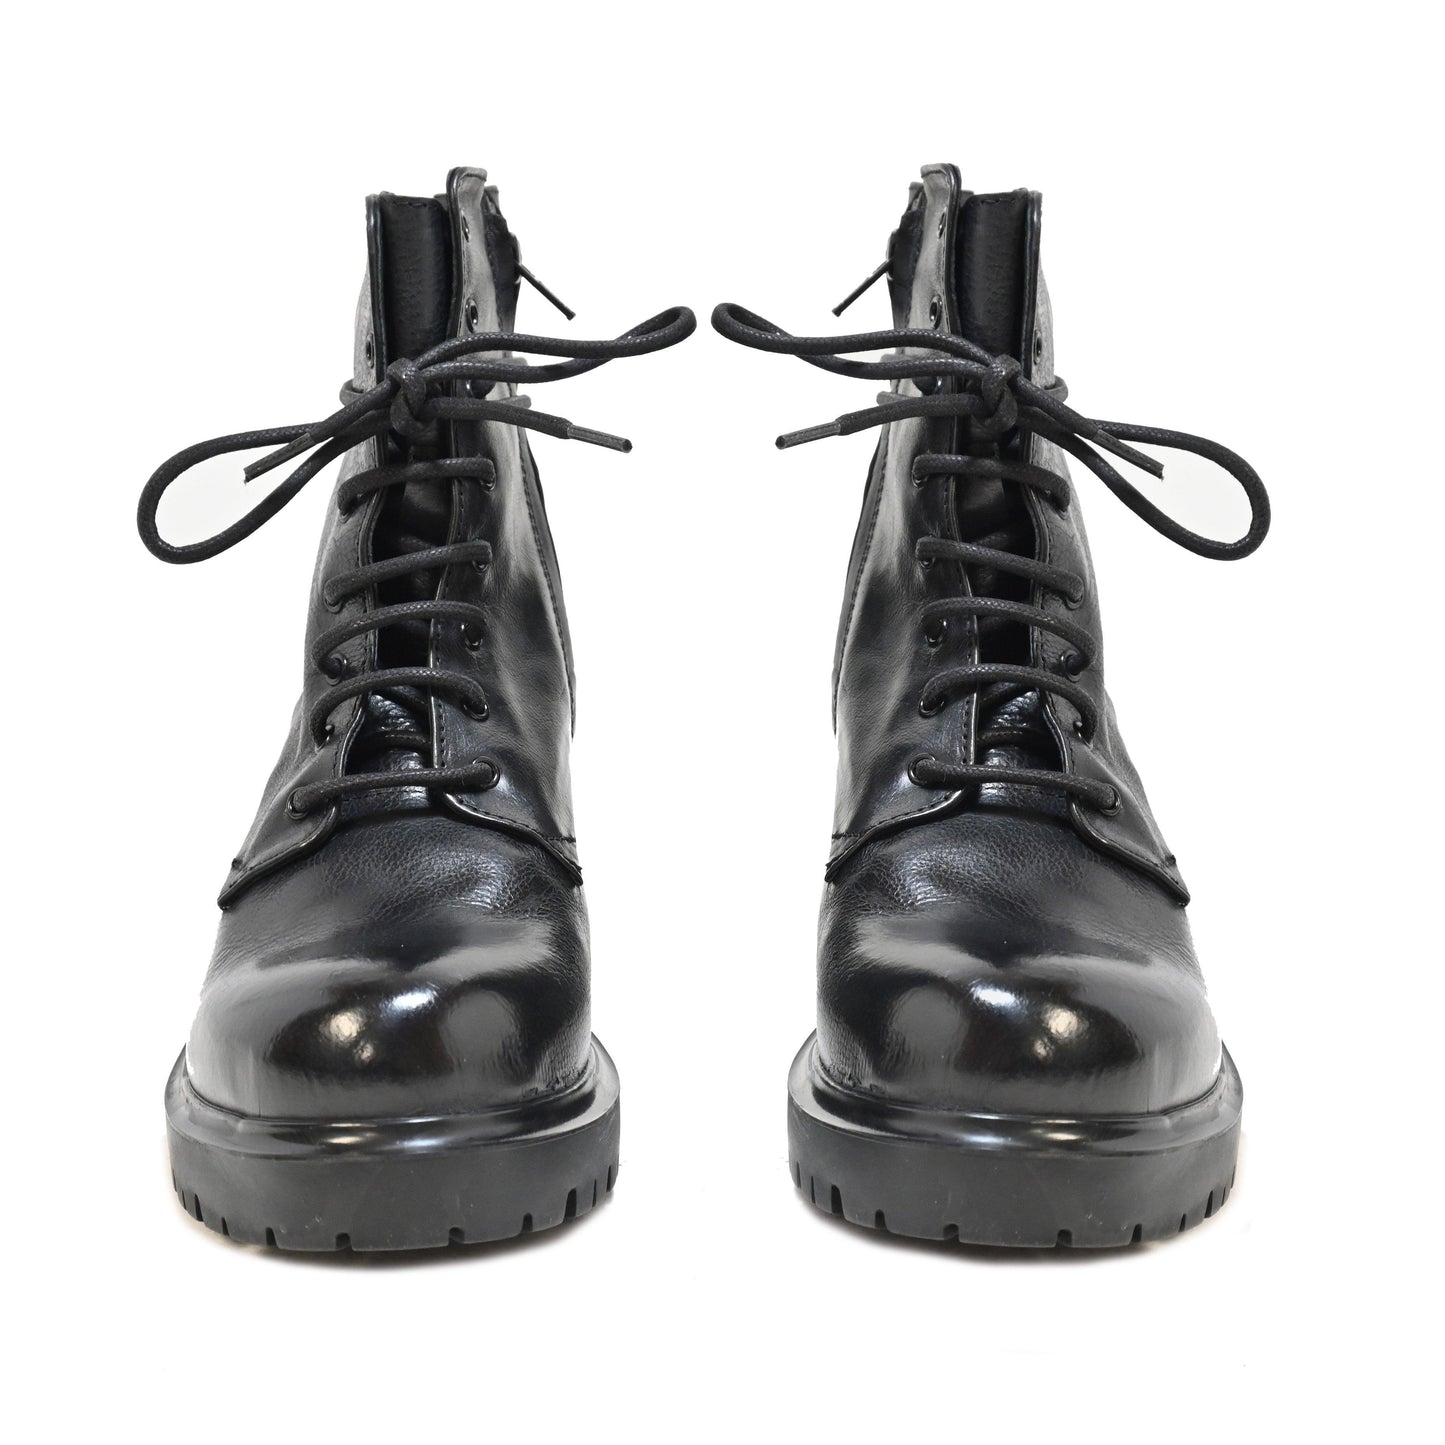 LINDA 01 - ankle boot leather BLACK - History541